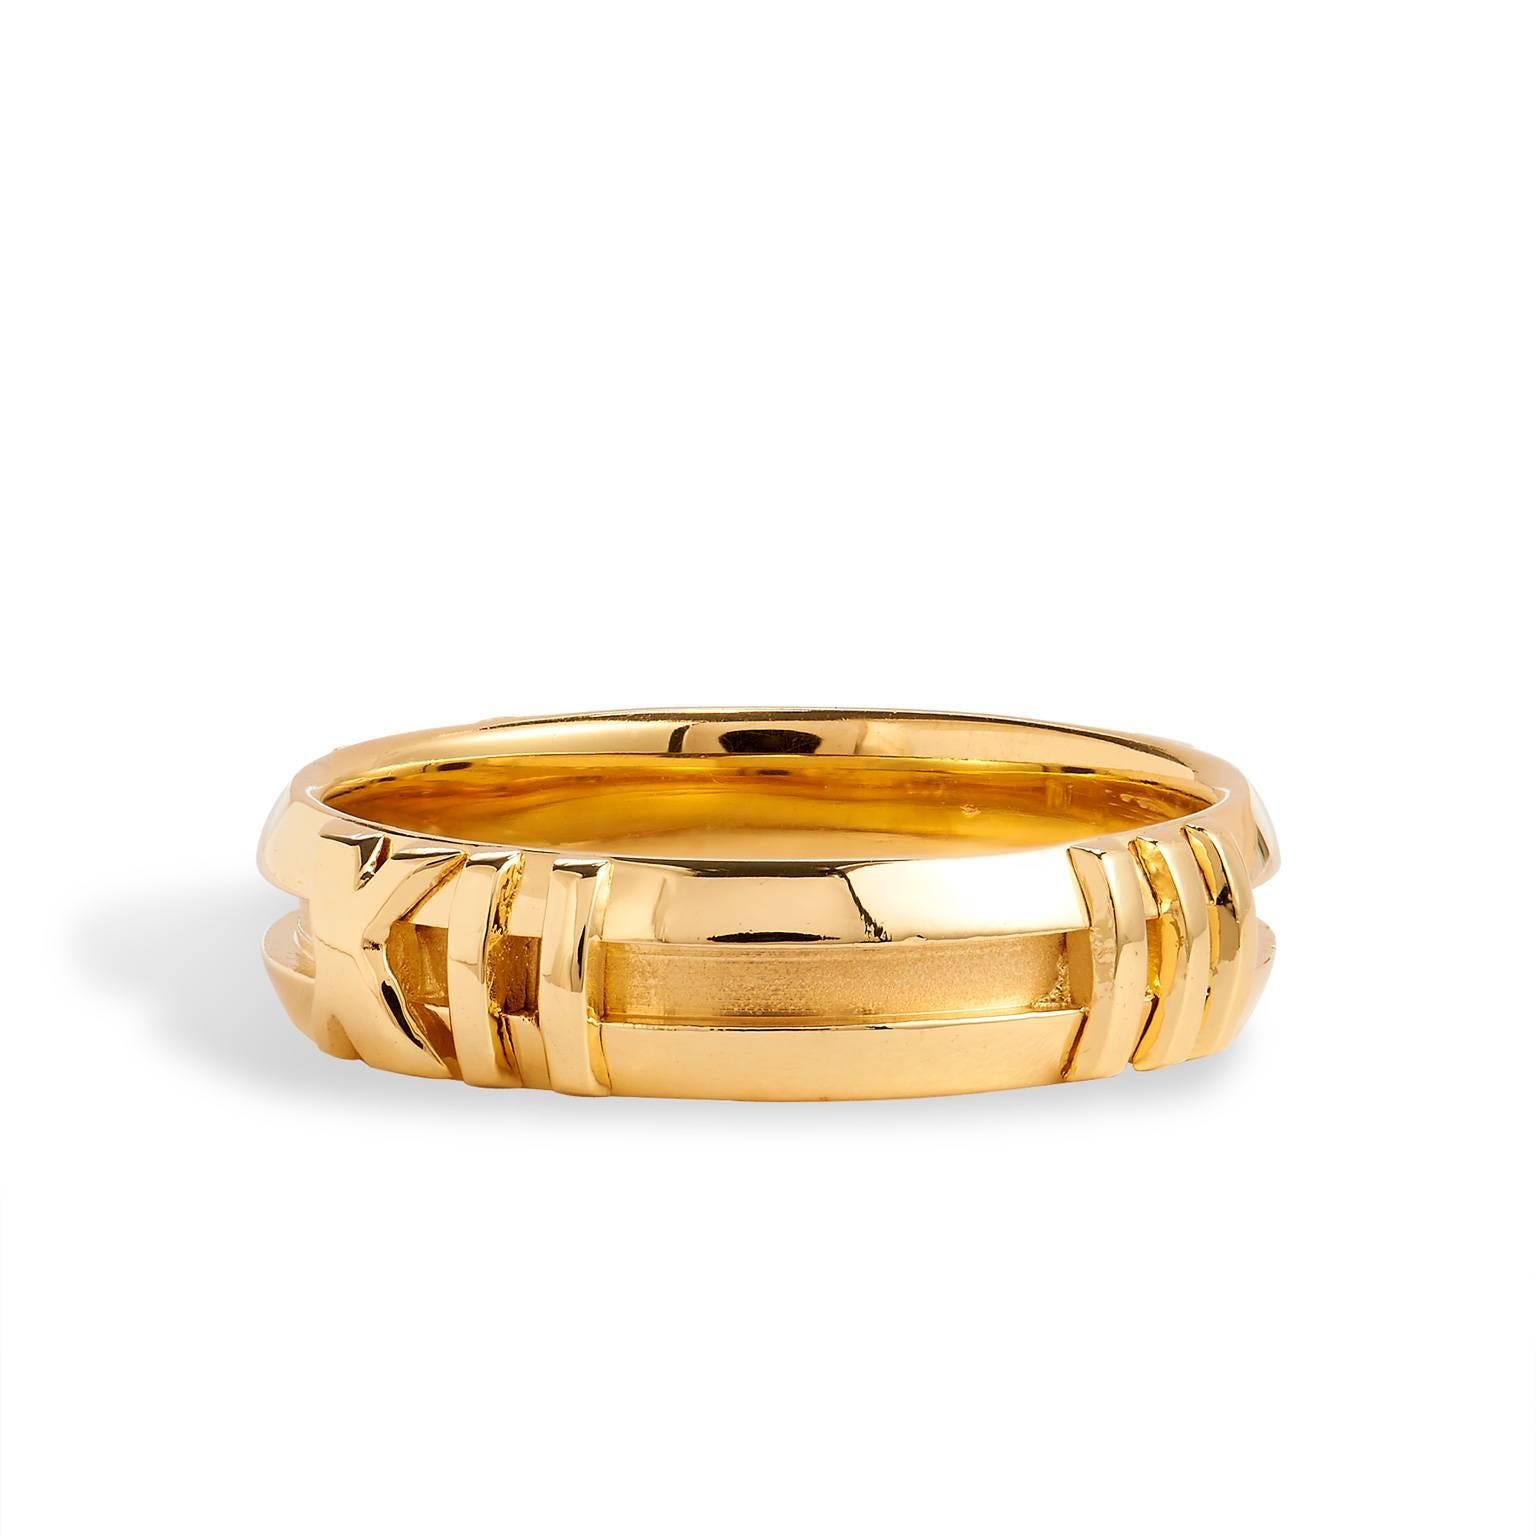 This Tiffany & Co Atlas ring is crafted in 18kt yellow gold and a treasured piece of Hallmark Tiffany & Co 1995. A contemporary design, this set is a part of the Atlas collection which features divine designs that are inspired by Greek mythology and